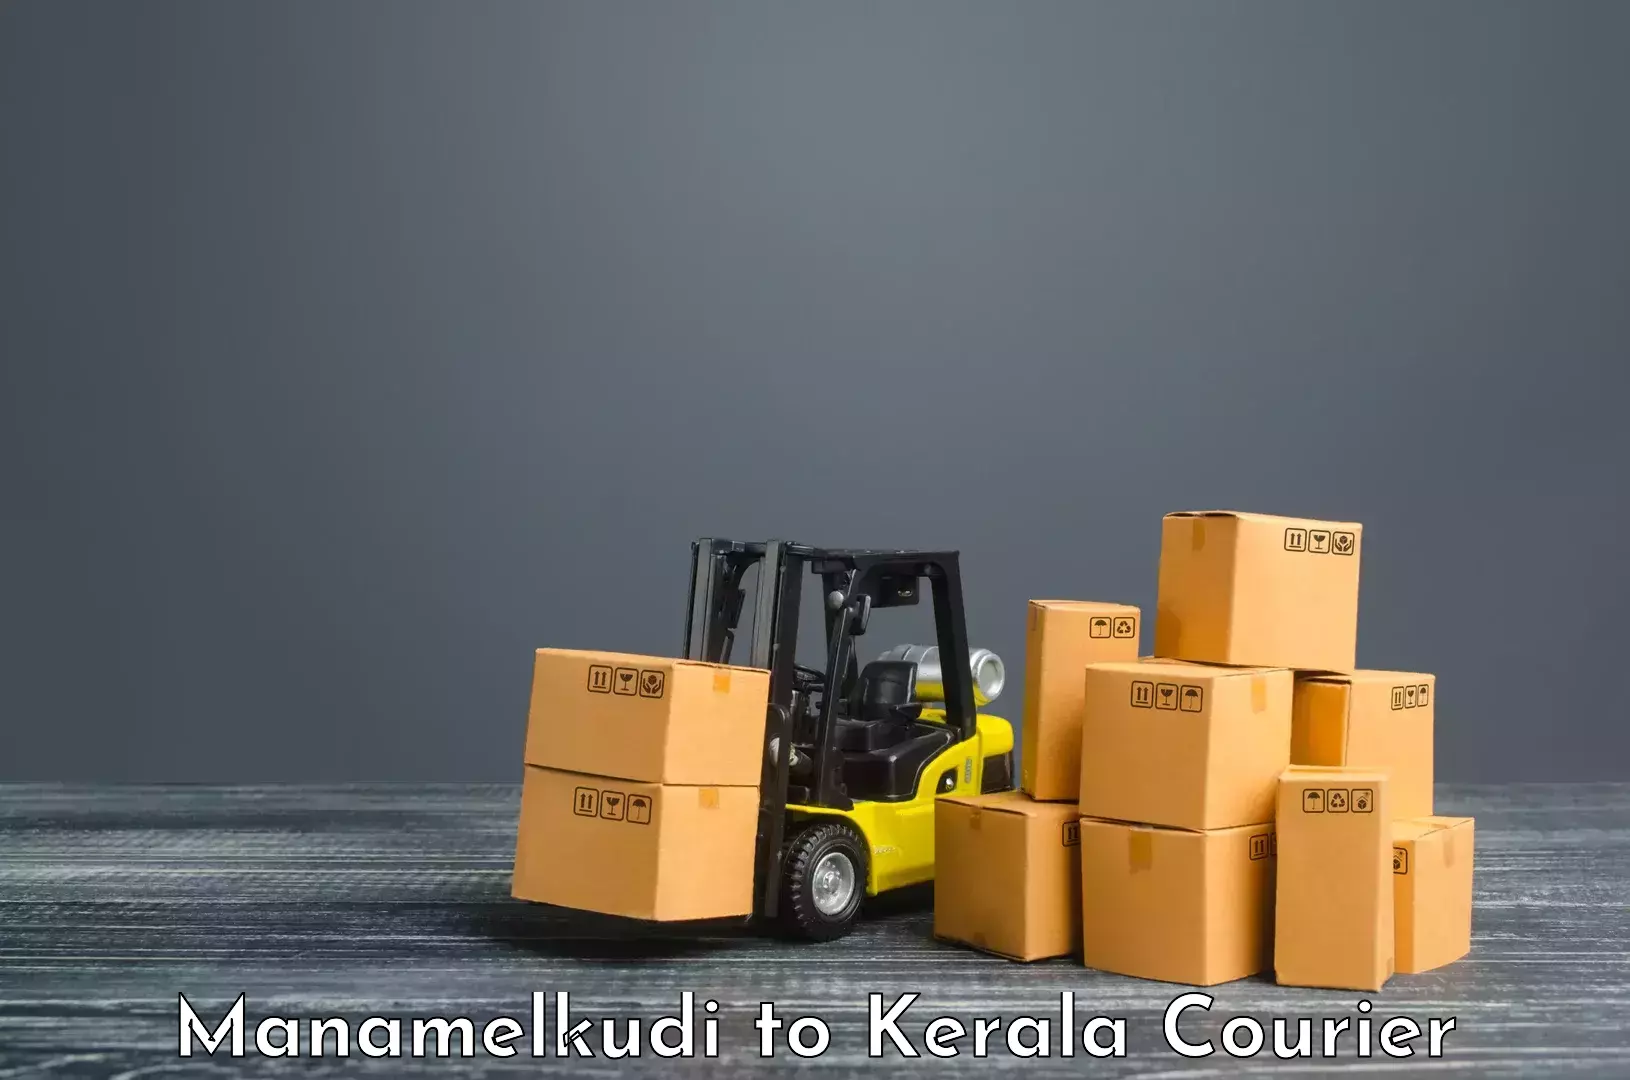 Same-day delivery solutions Manamelkudi to Kuchi